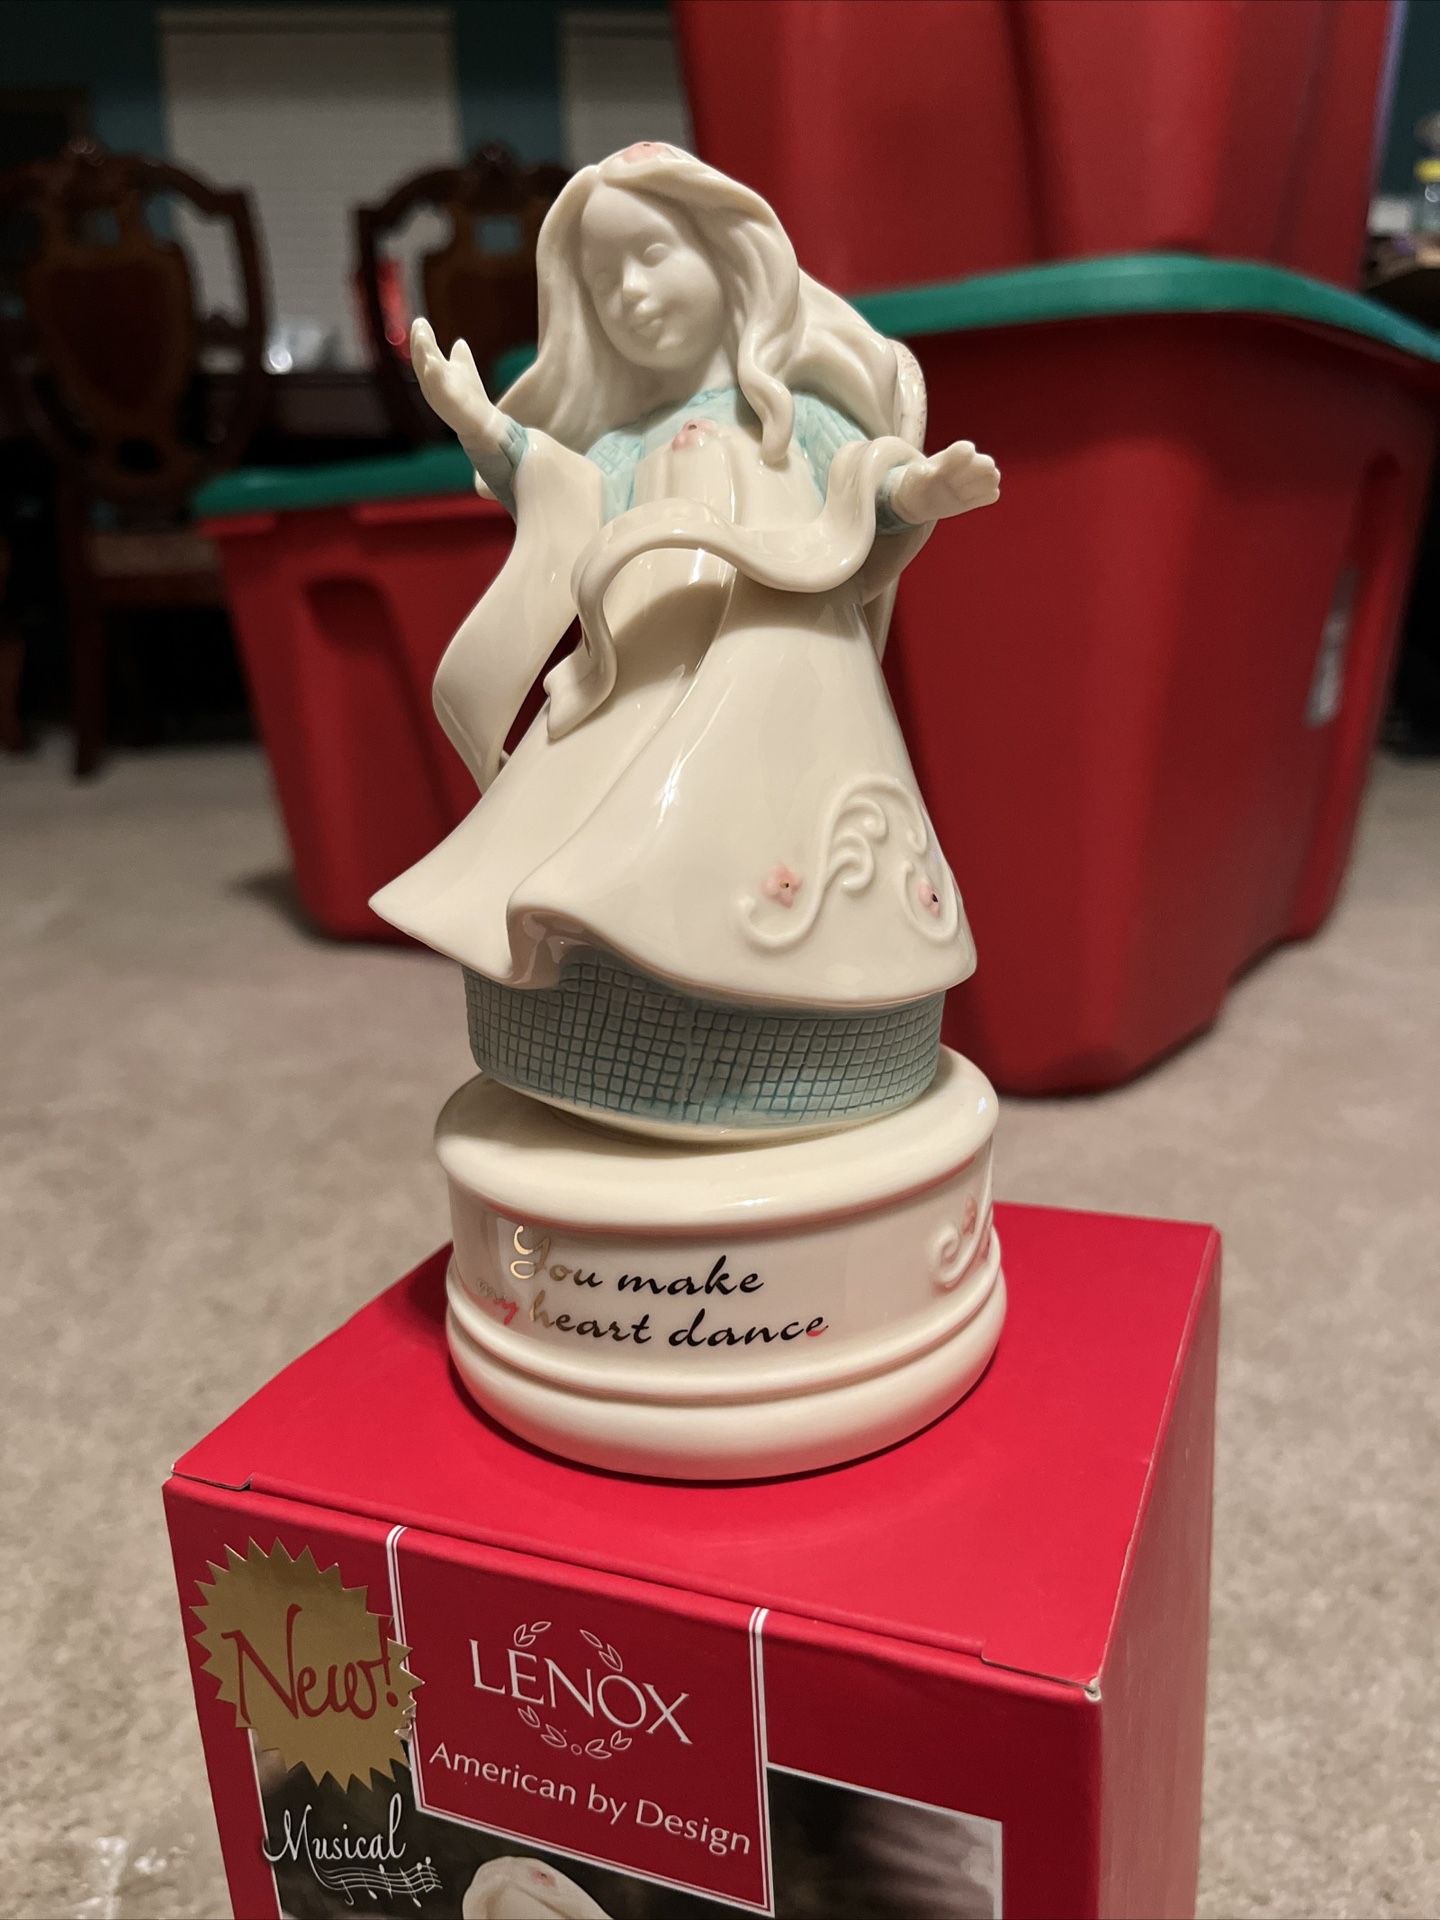 Lenox Musical Angel Figurine GIFTS OF GRACE plays Beautiful Dreamer - New In Box